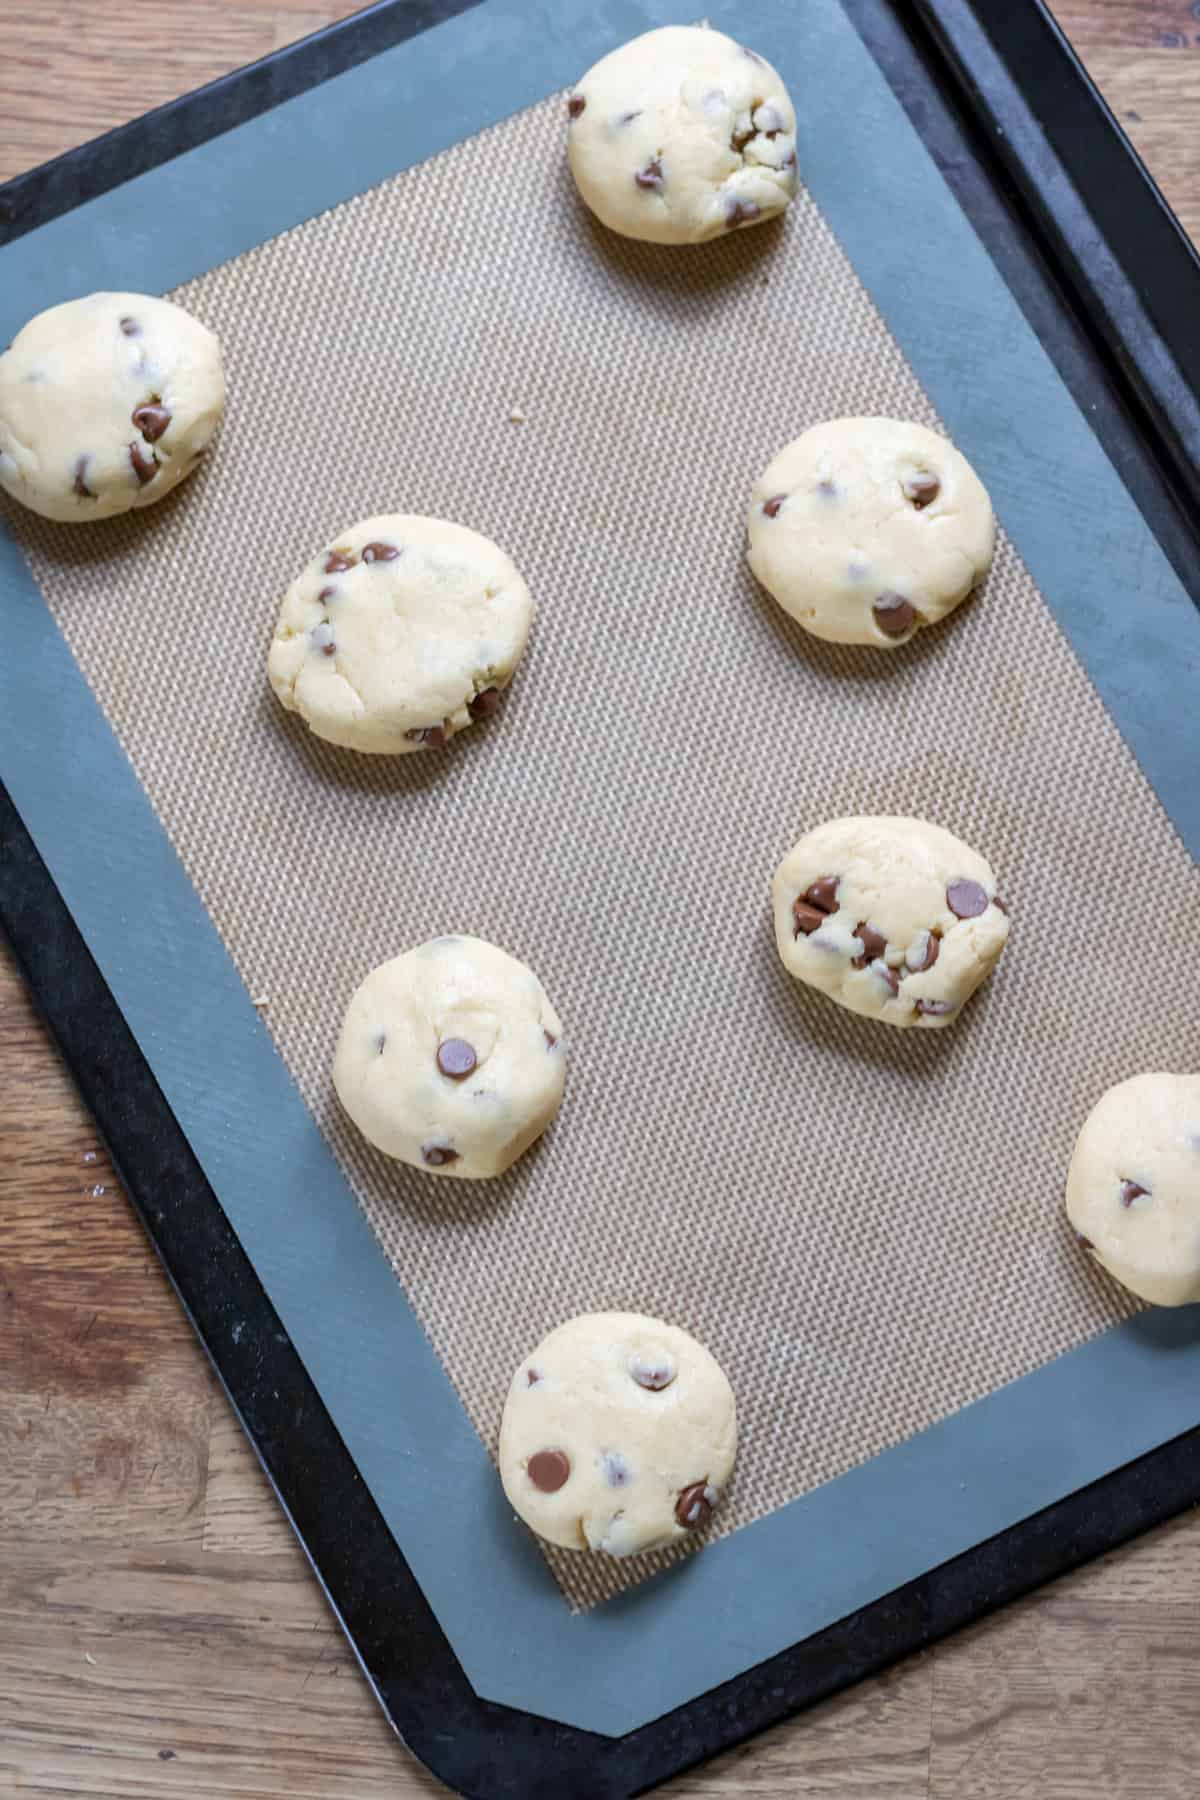 Cookies on a cookie sheet ready to bake.